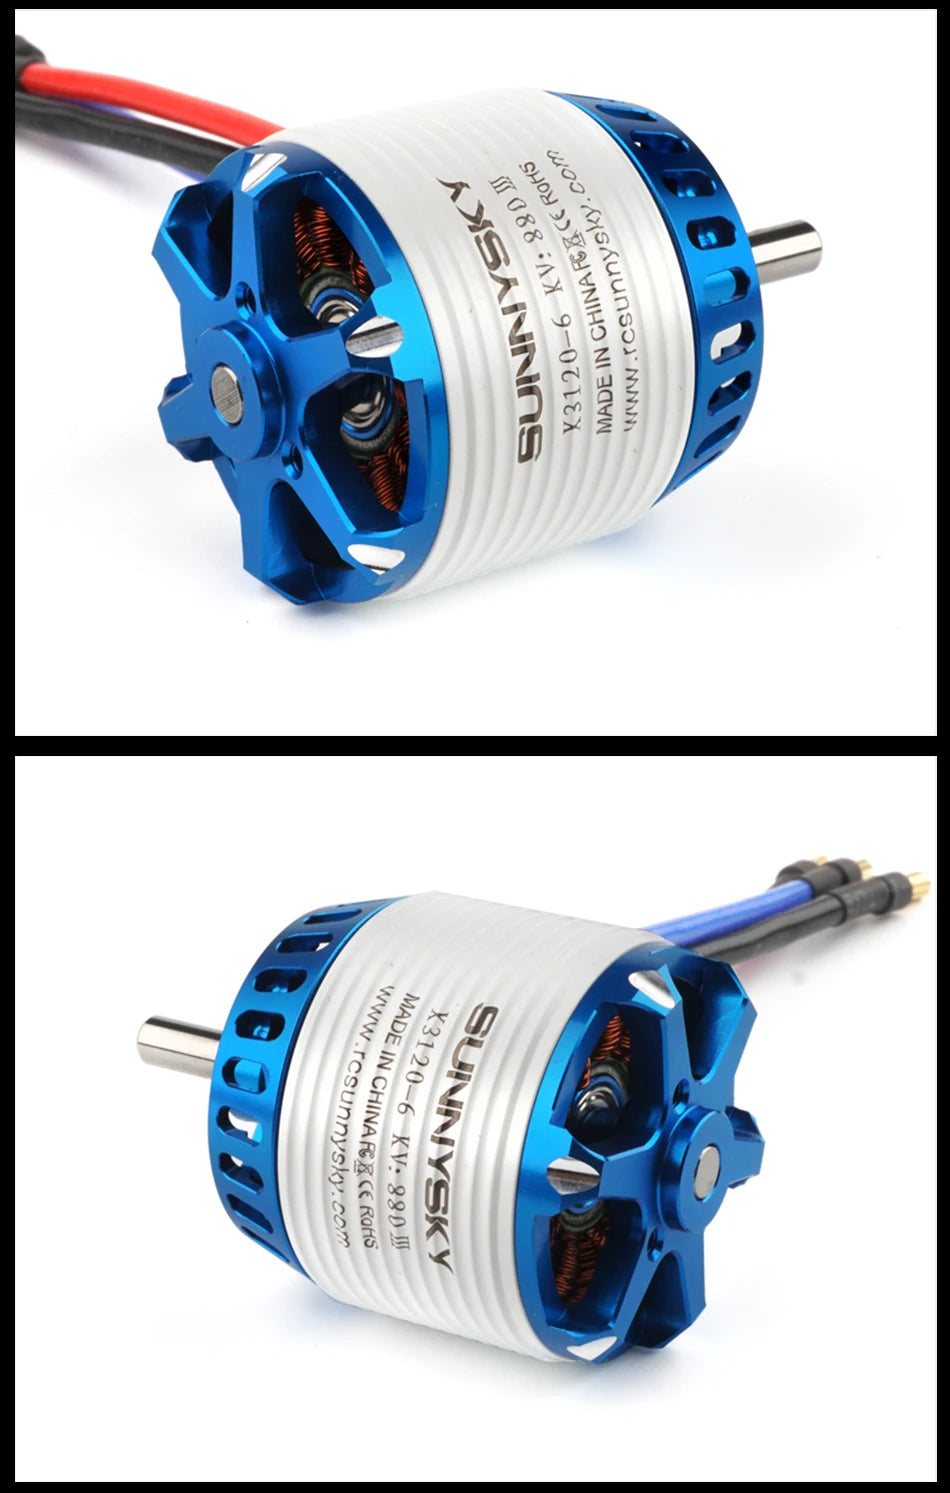 X3120-III Brushless Motor for RC Quadcopter Airplanes